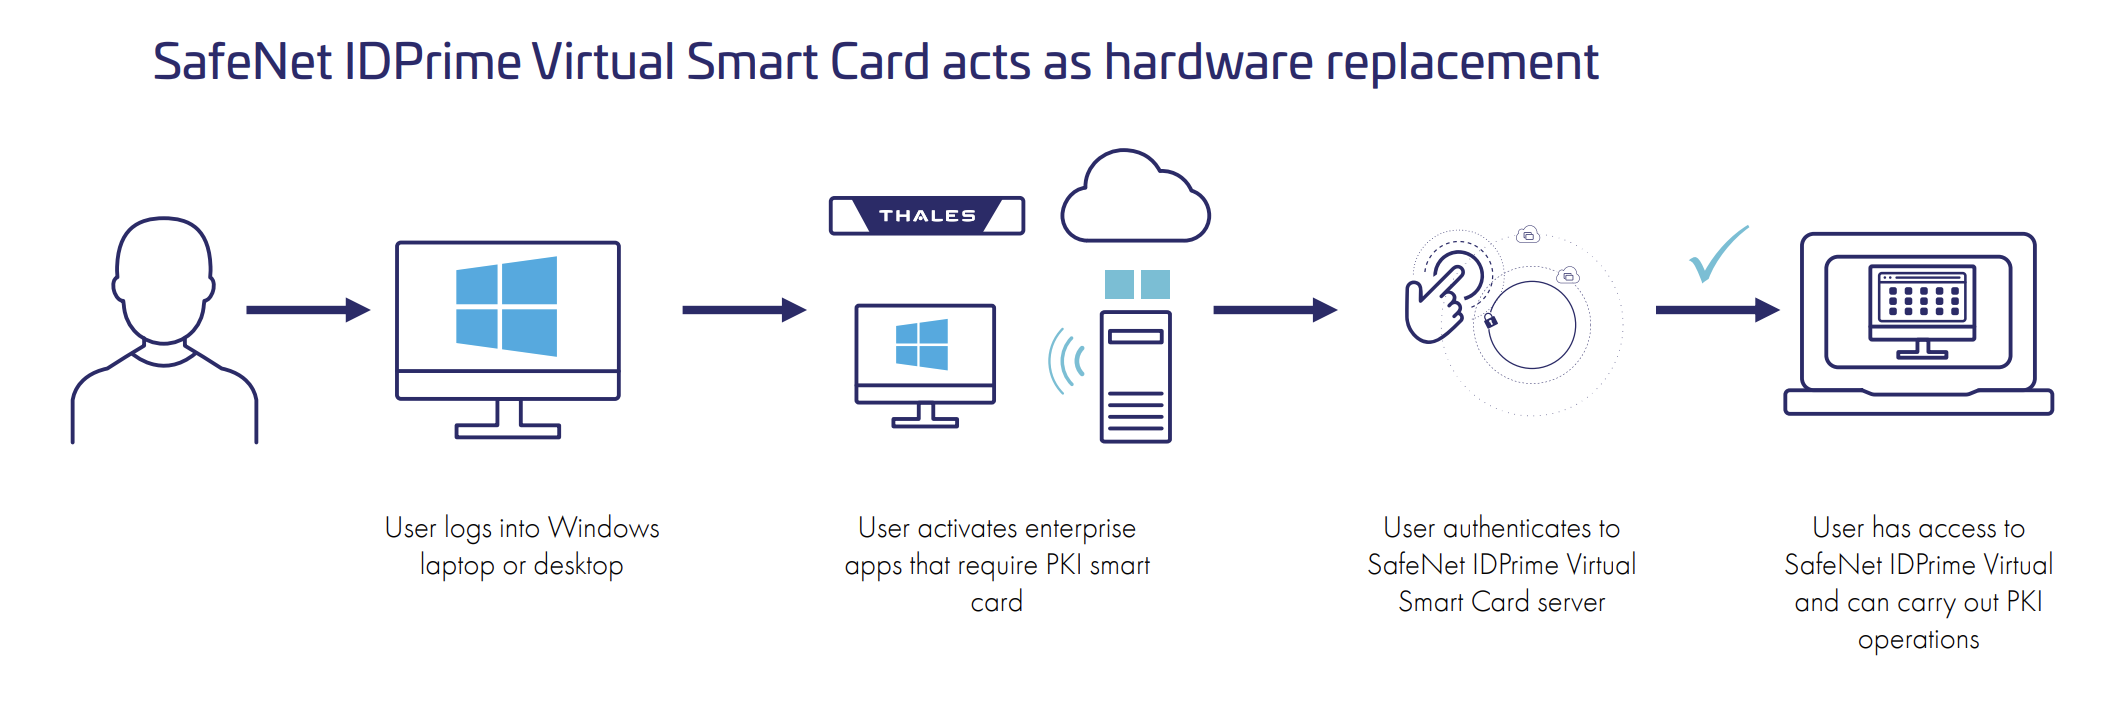 User logs into Windows and activates enterprise apps with PKI Smart Card